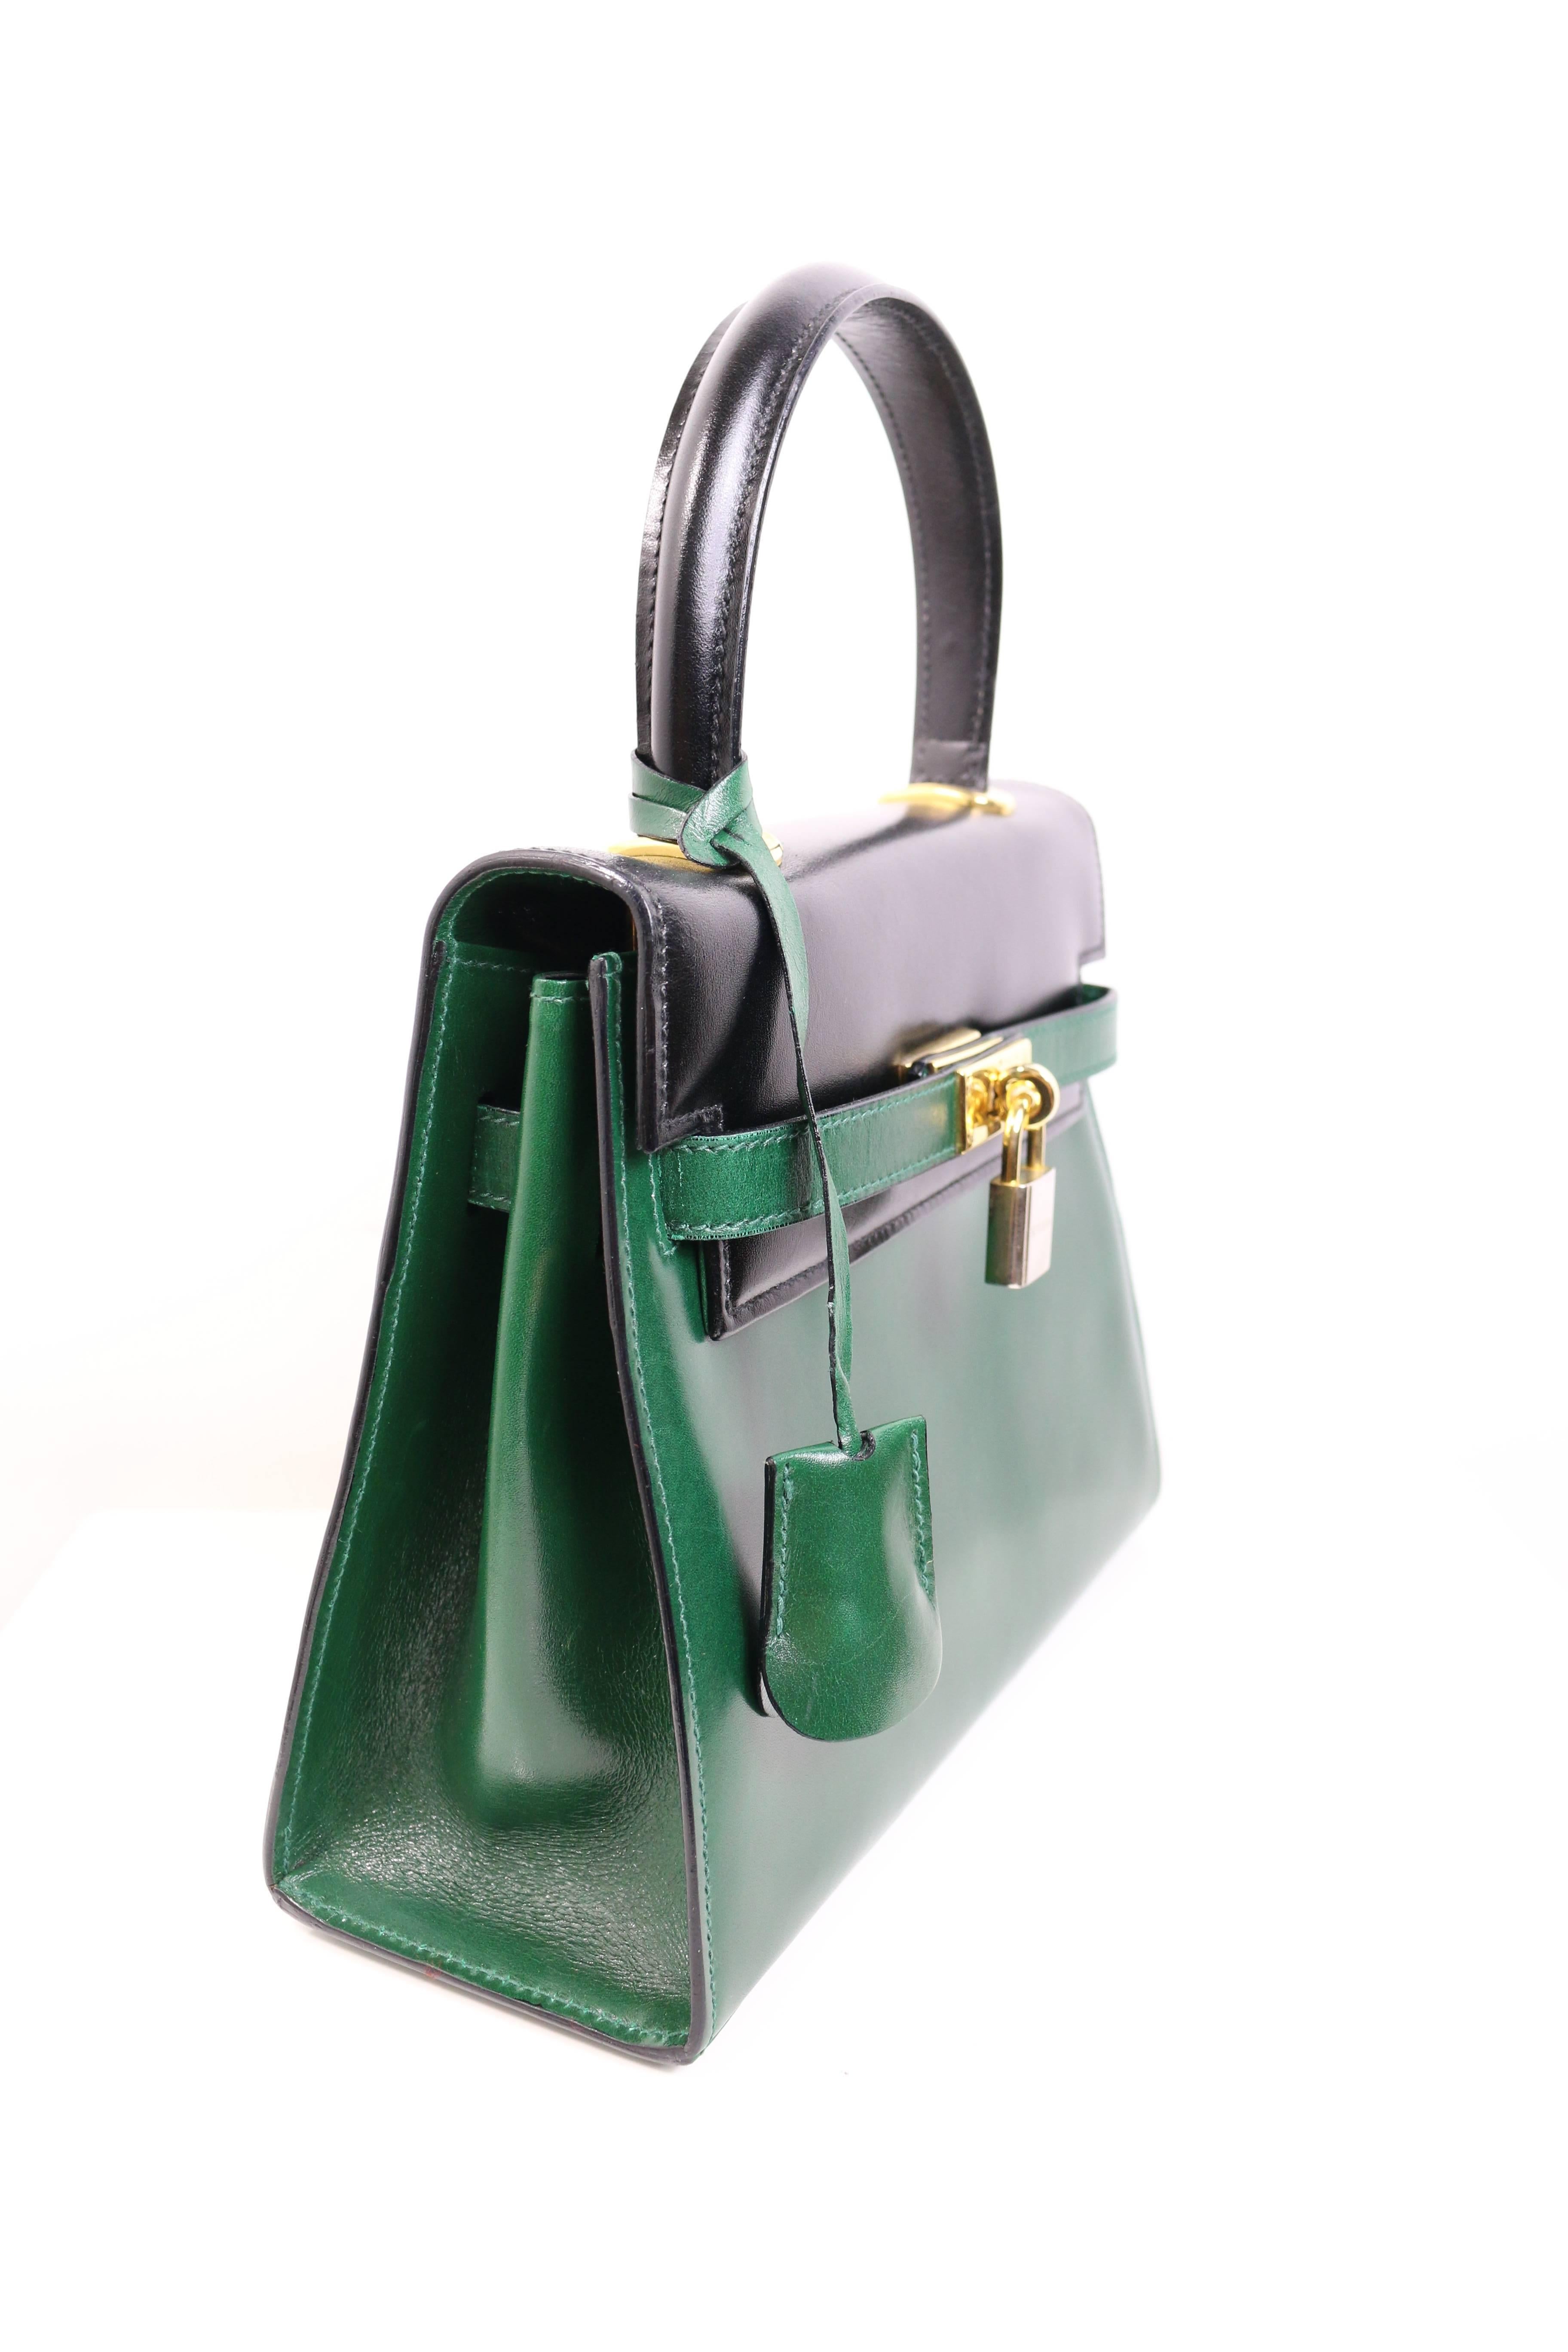 green and black purse